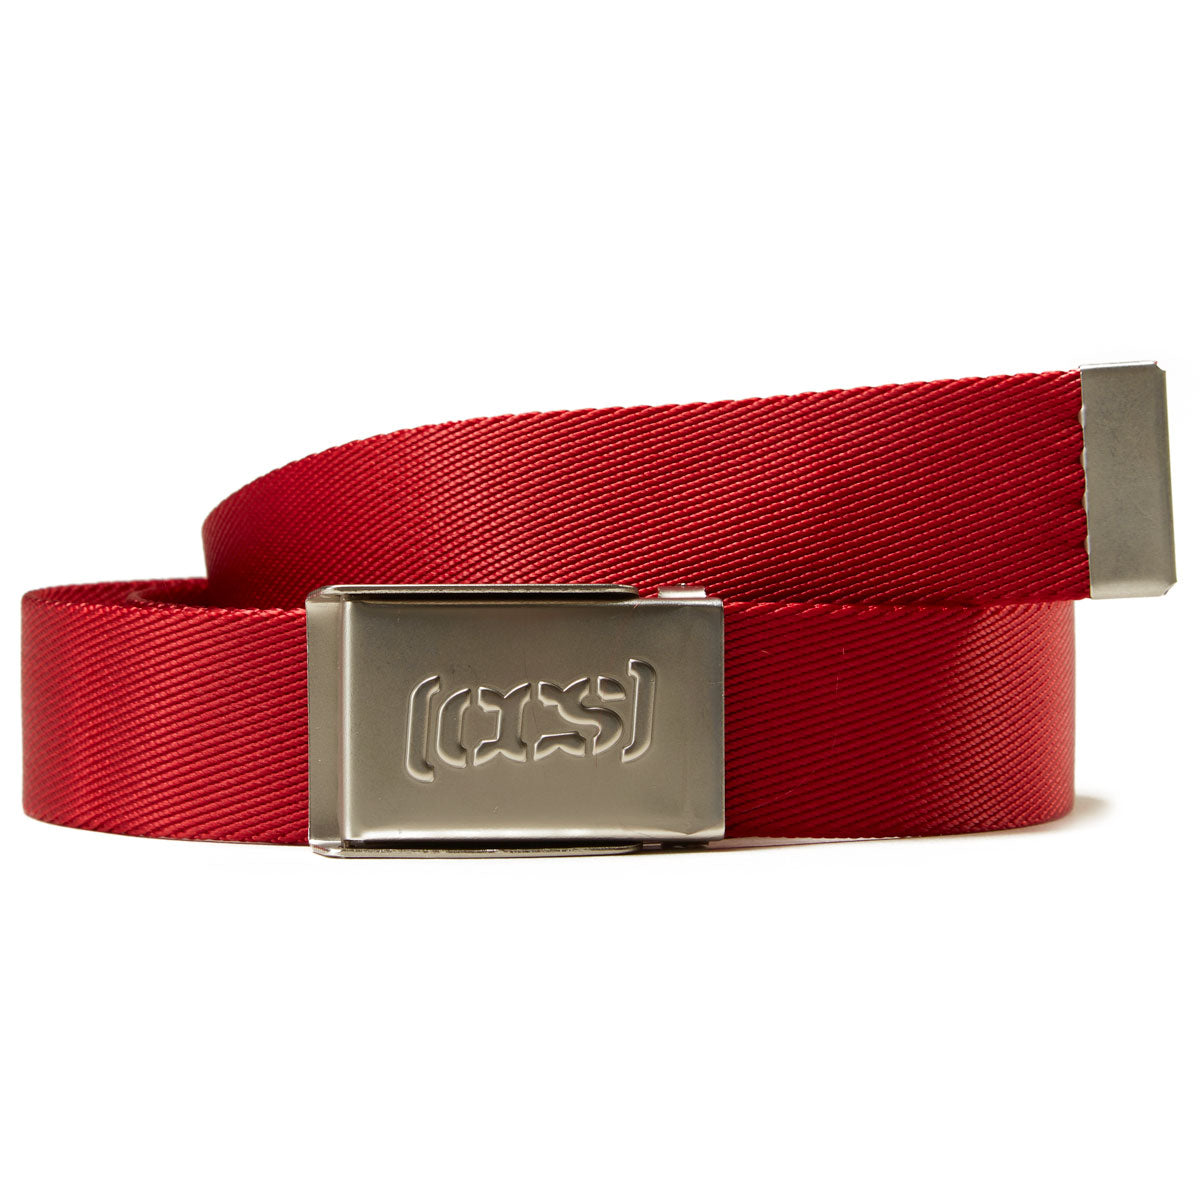 CCS Silver Logo Buckle Belt - Red image 1